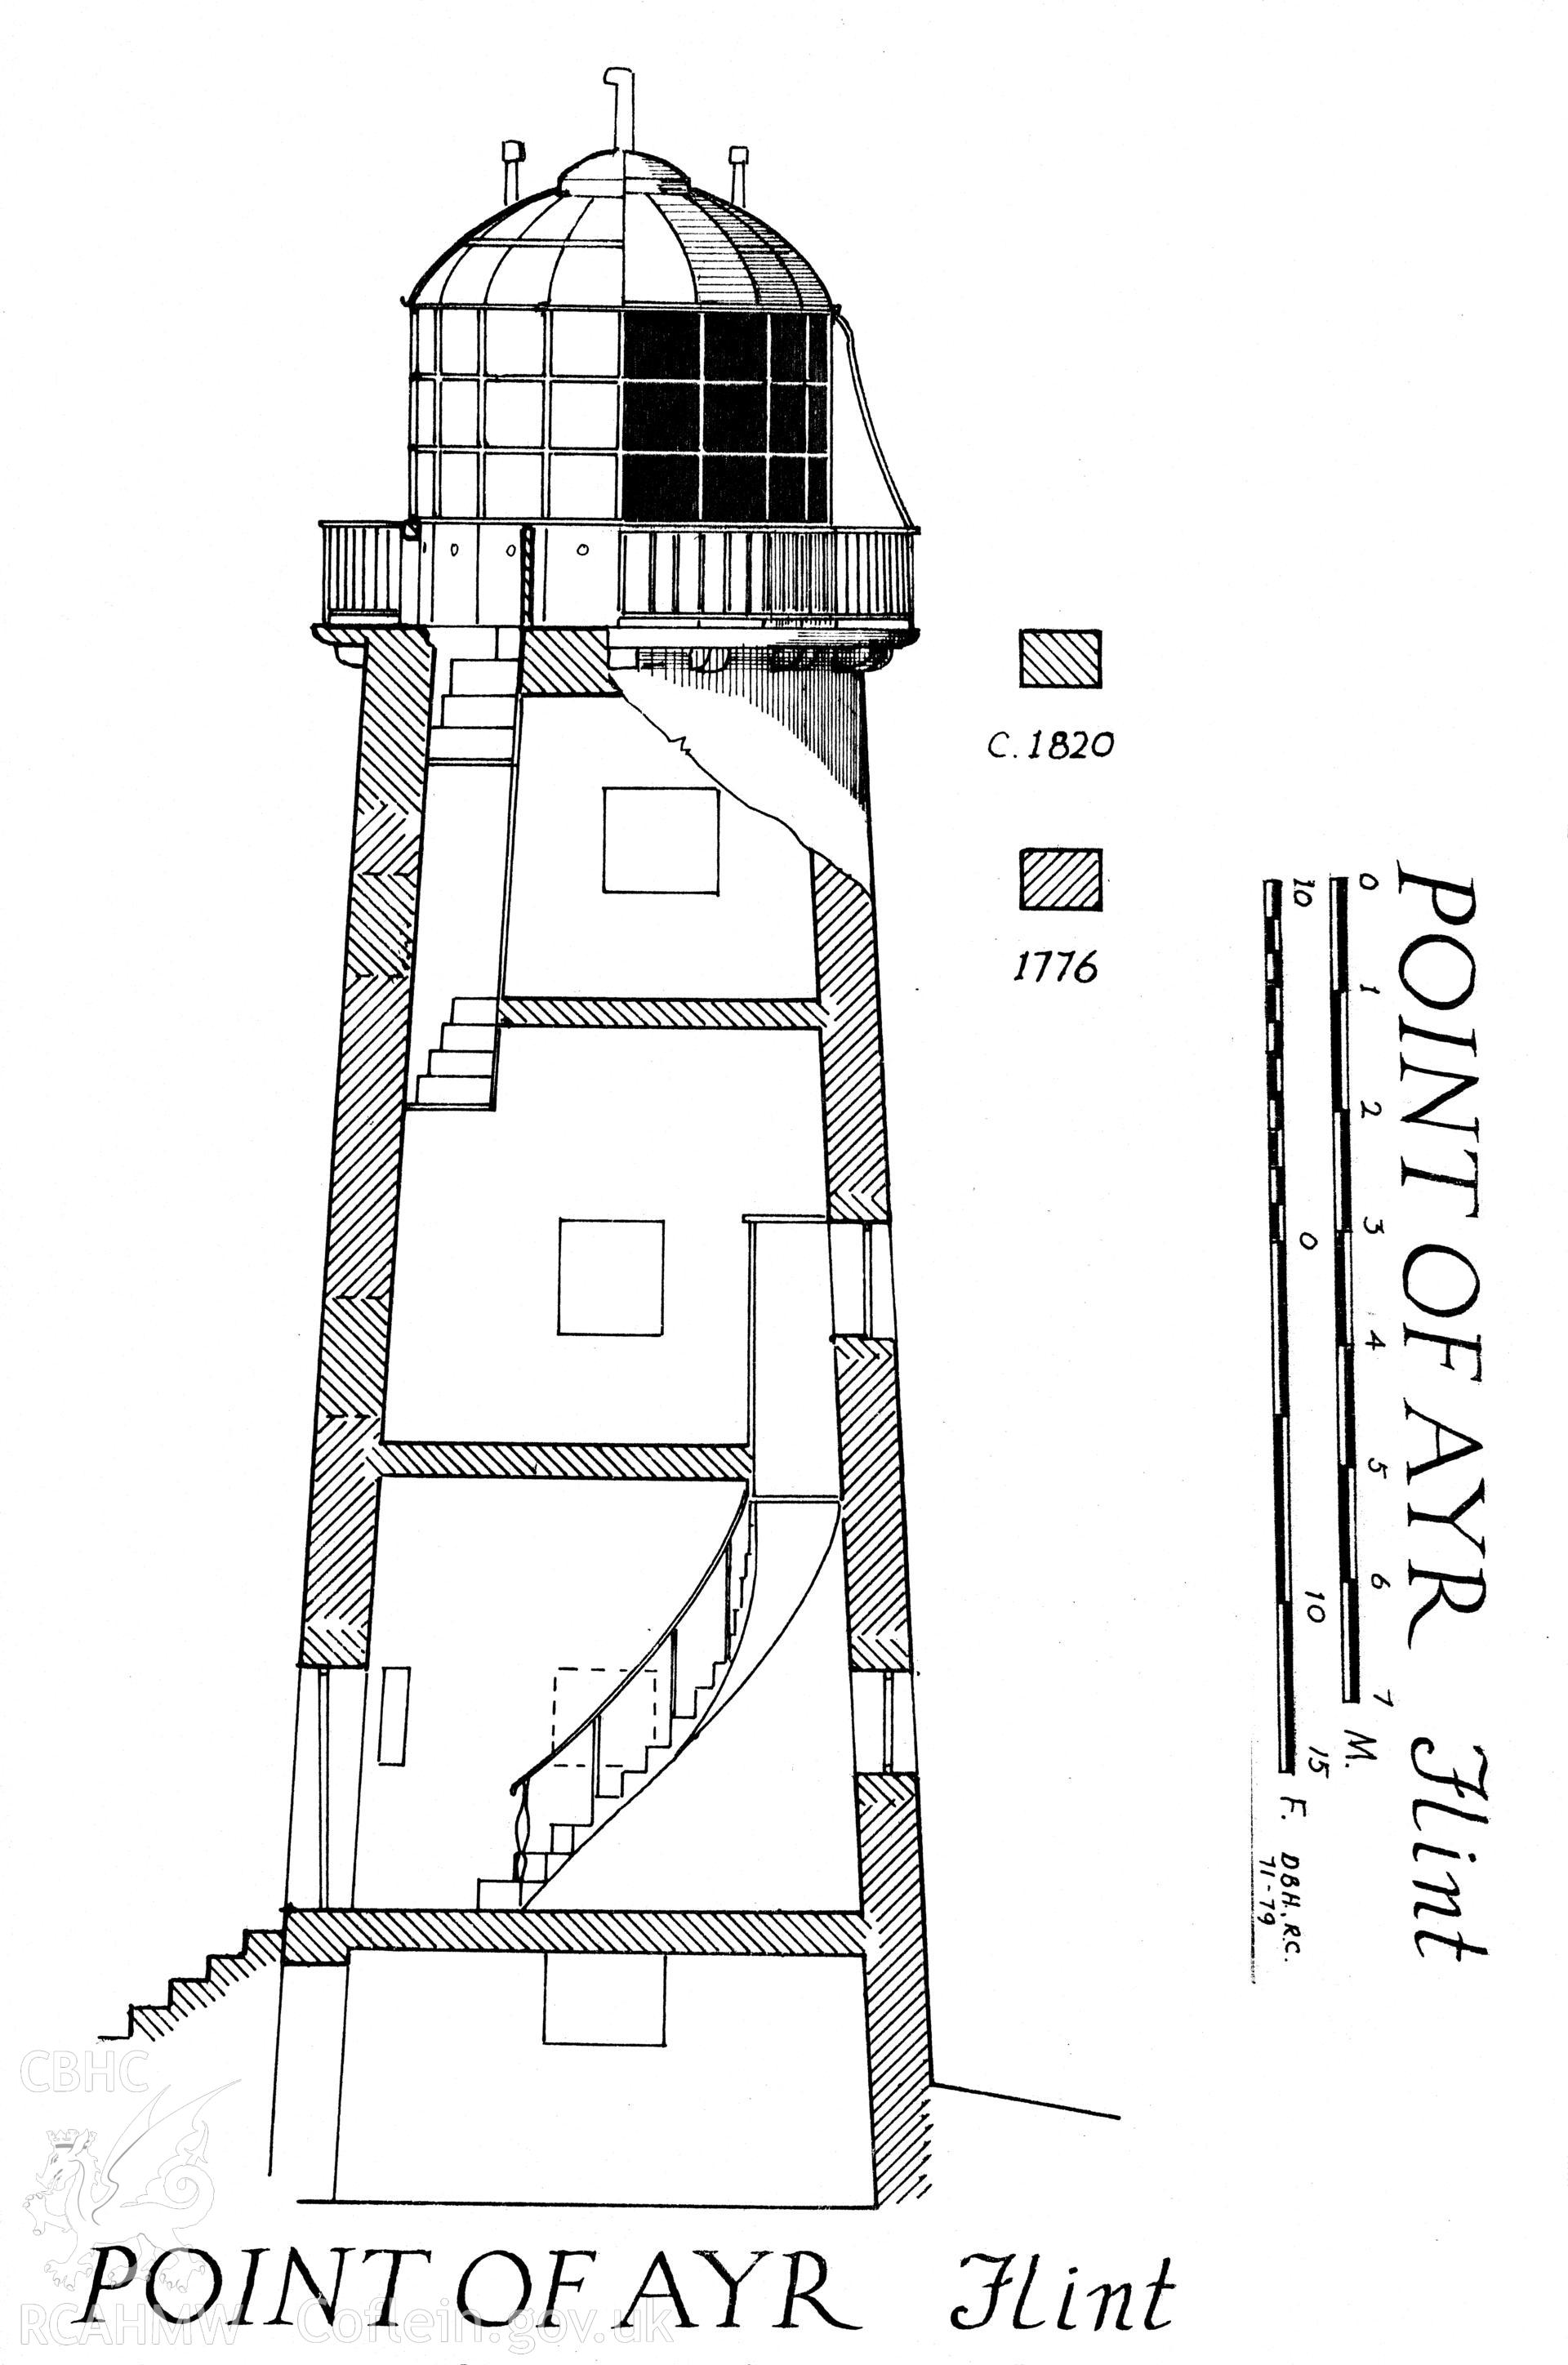 Copy of a drawing showing section of Point of Ayr Lighthouse.